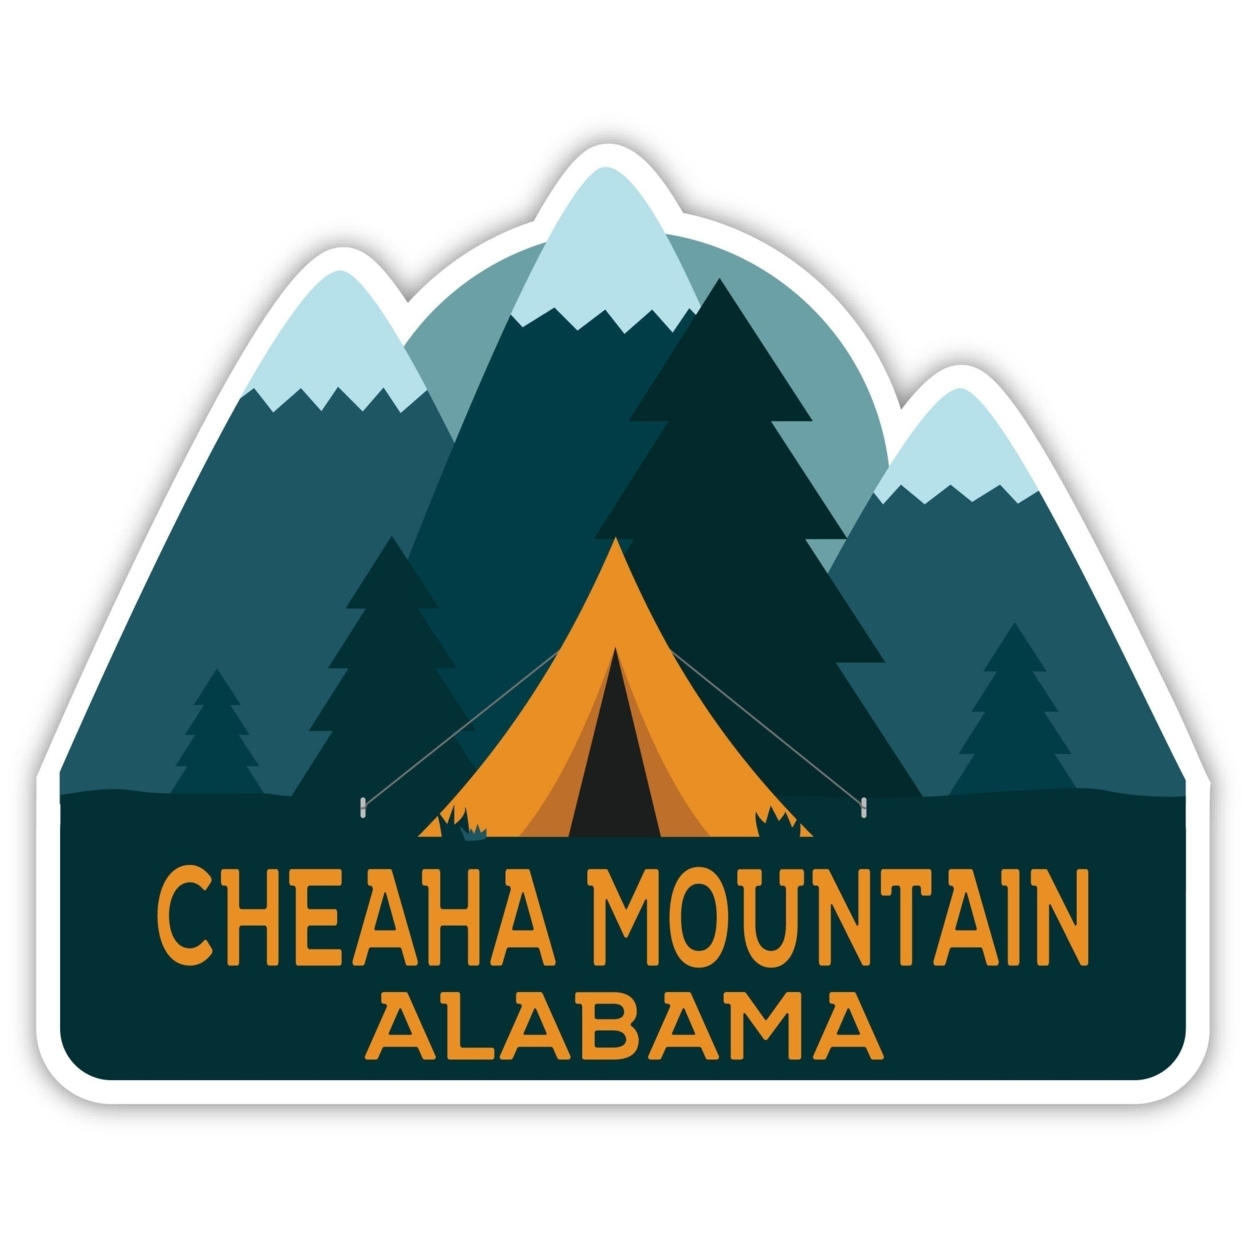 Cheaha Mountain Alabama Souvenir Decorative Stickers (Choose Theme And Size) - Single Unit, 6-Inch, Great Outdoors